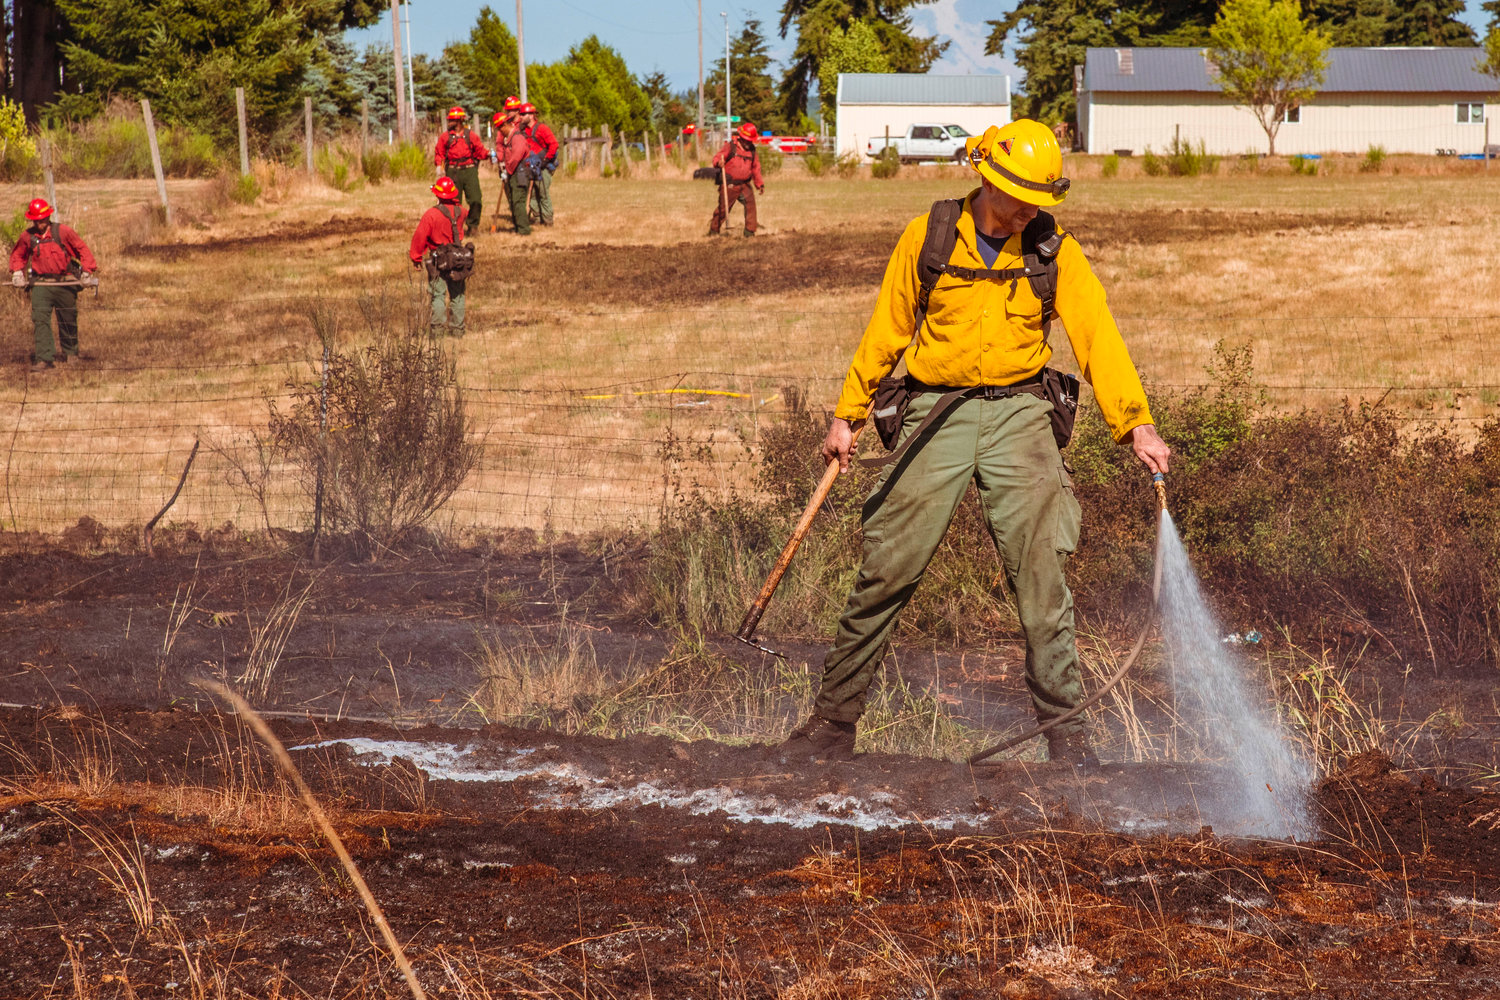 A Department of Natural Resources firefighter uses a hose to extinguish hot spots along the northbound lane of Interstate 5 on Wednesday.